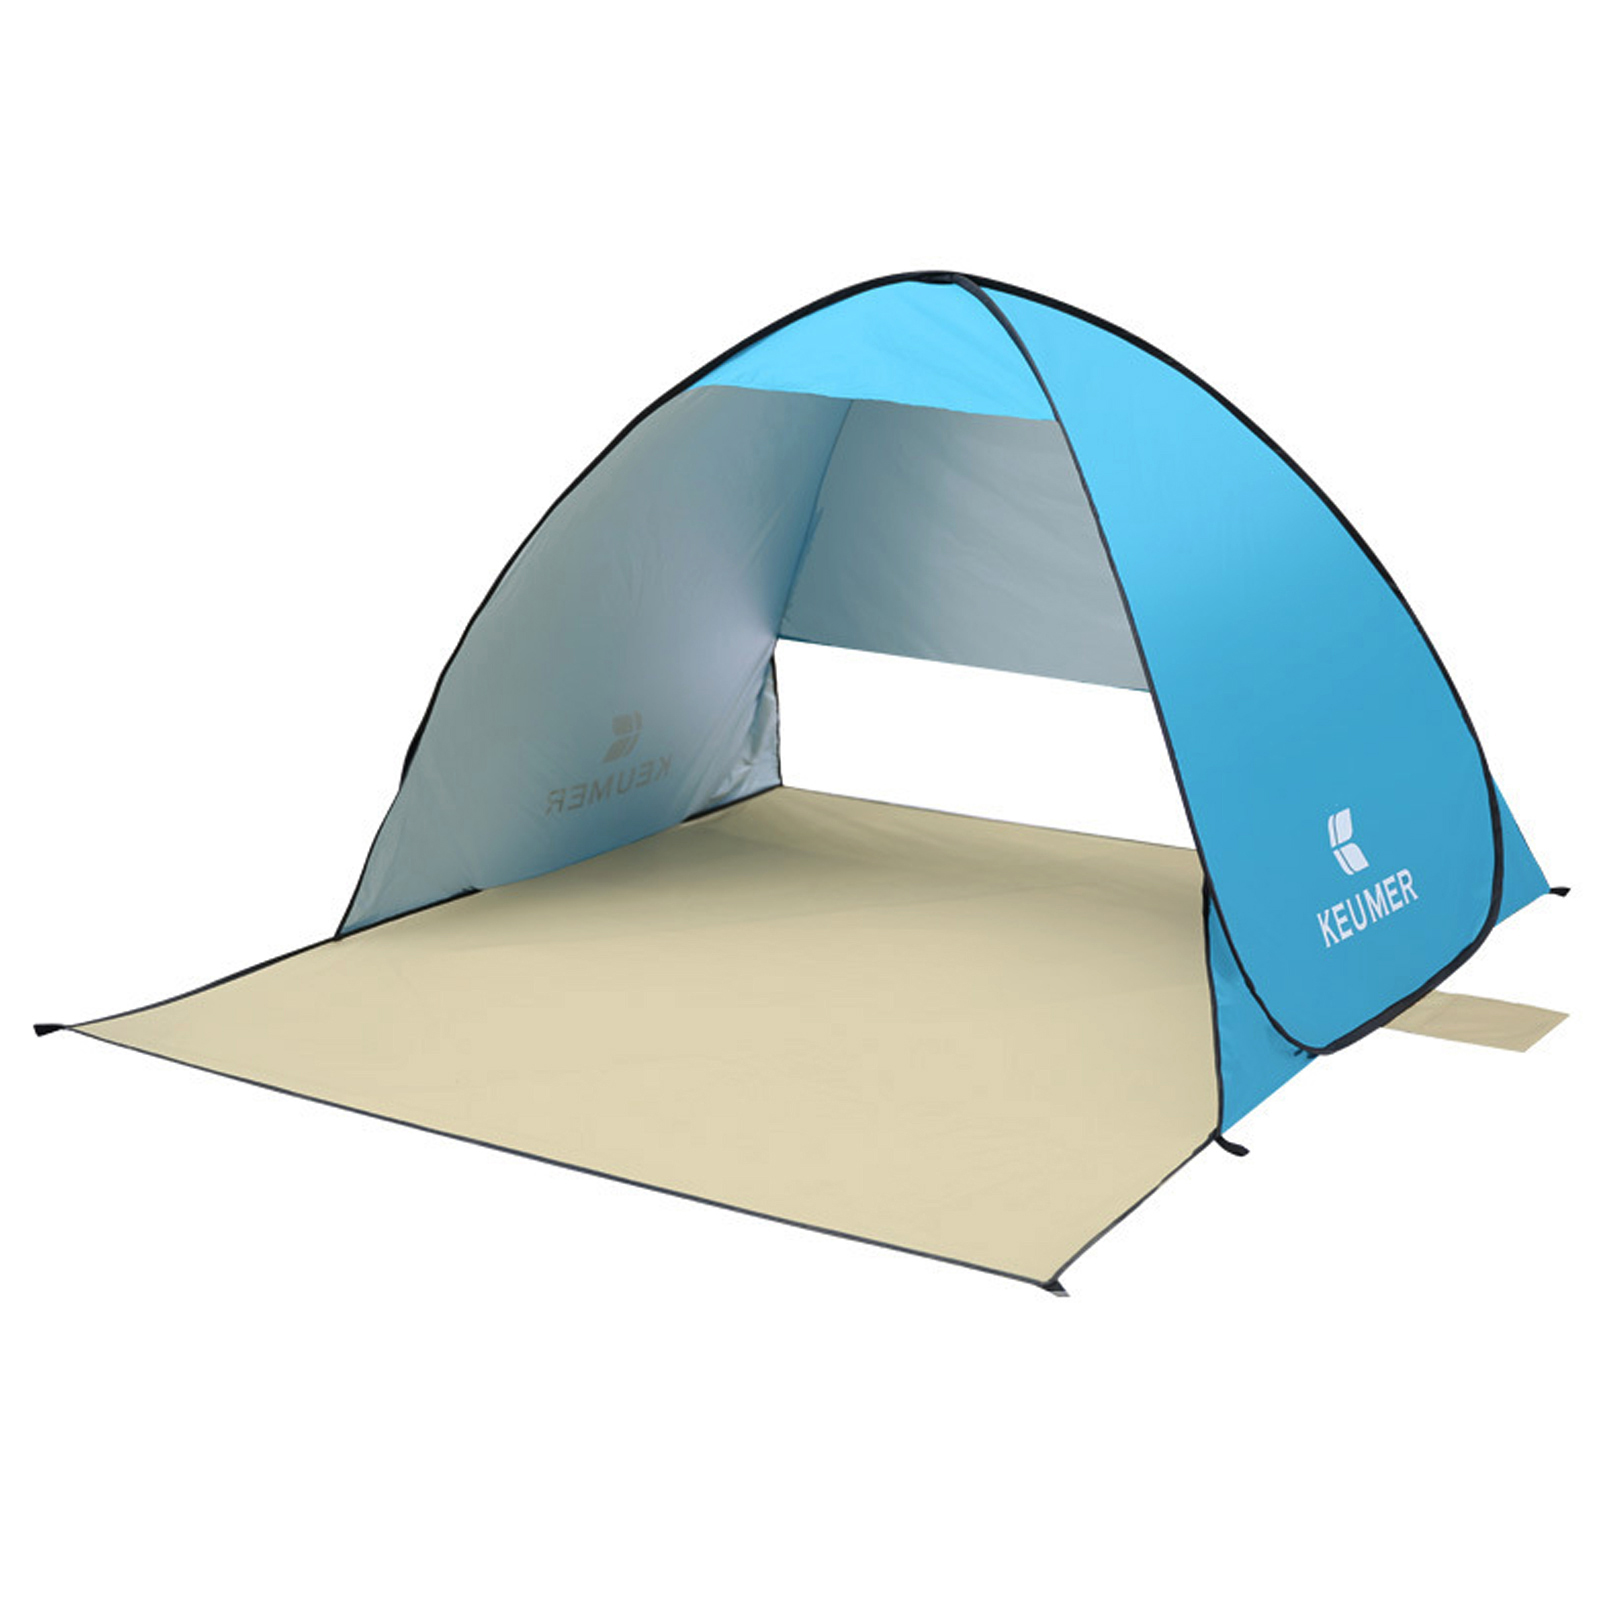 KEUMER Instant Pop-Up Beach Tent 70.9x59x43.3 Inch UV Sun Shelter for Camping Fishing Hiking Anti UV Cabana Picnic - image 4 of 7